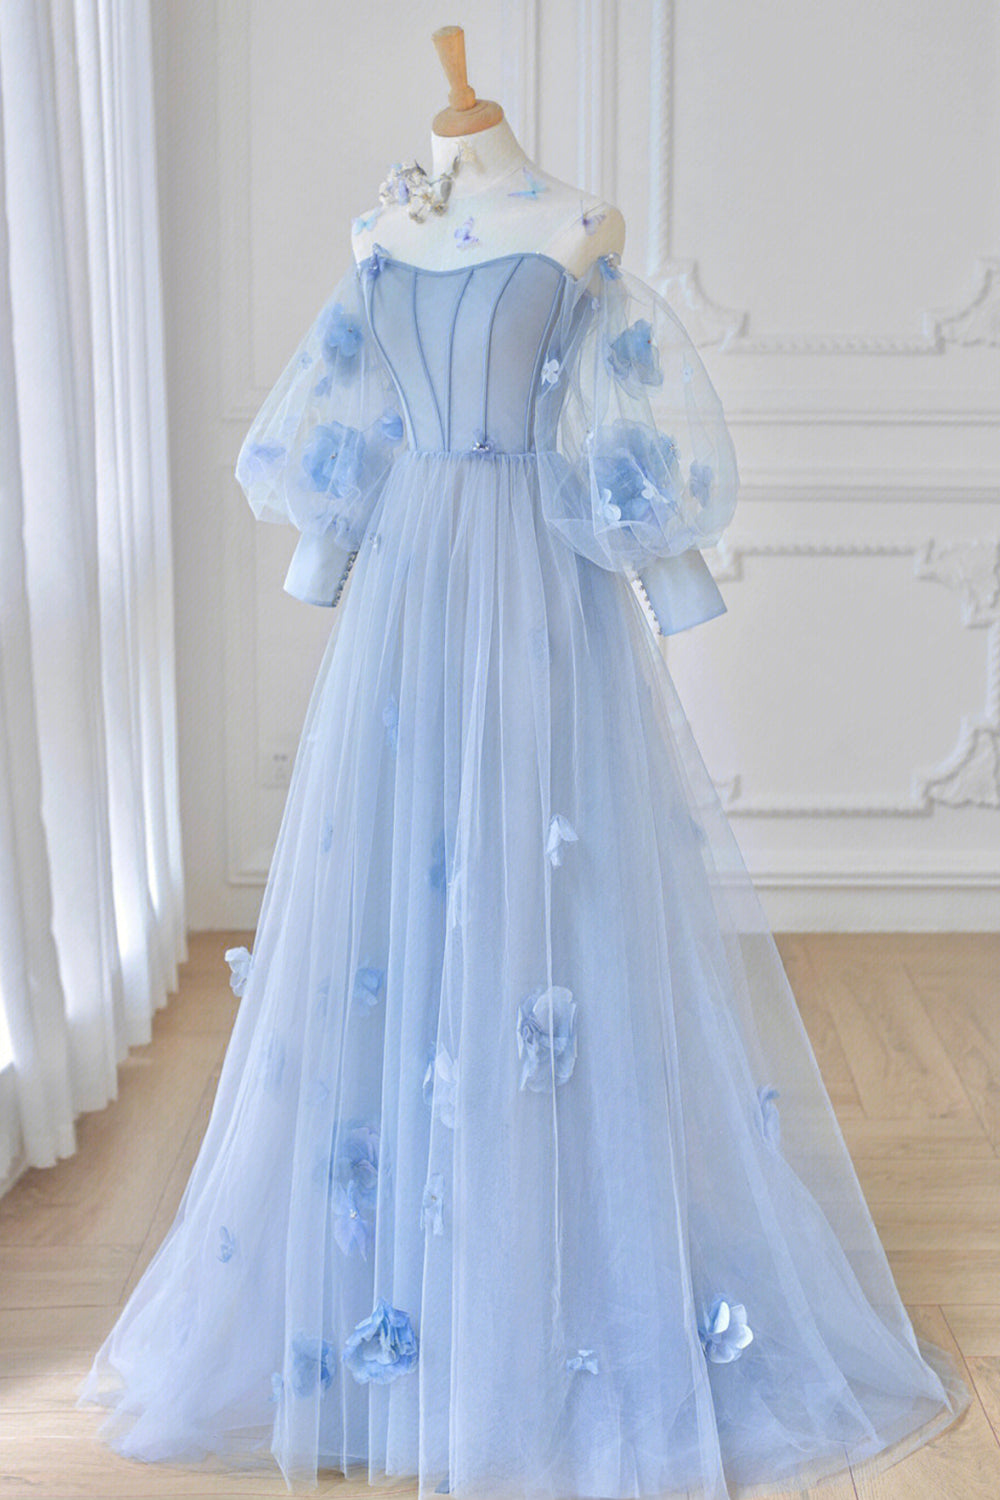 Blue Tulle Long Sleeve Corset Prom Dresses, Cute A-Line Evening Dresses with Applique Gowns, Party Dress Open Back